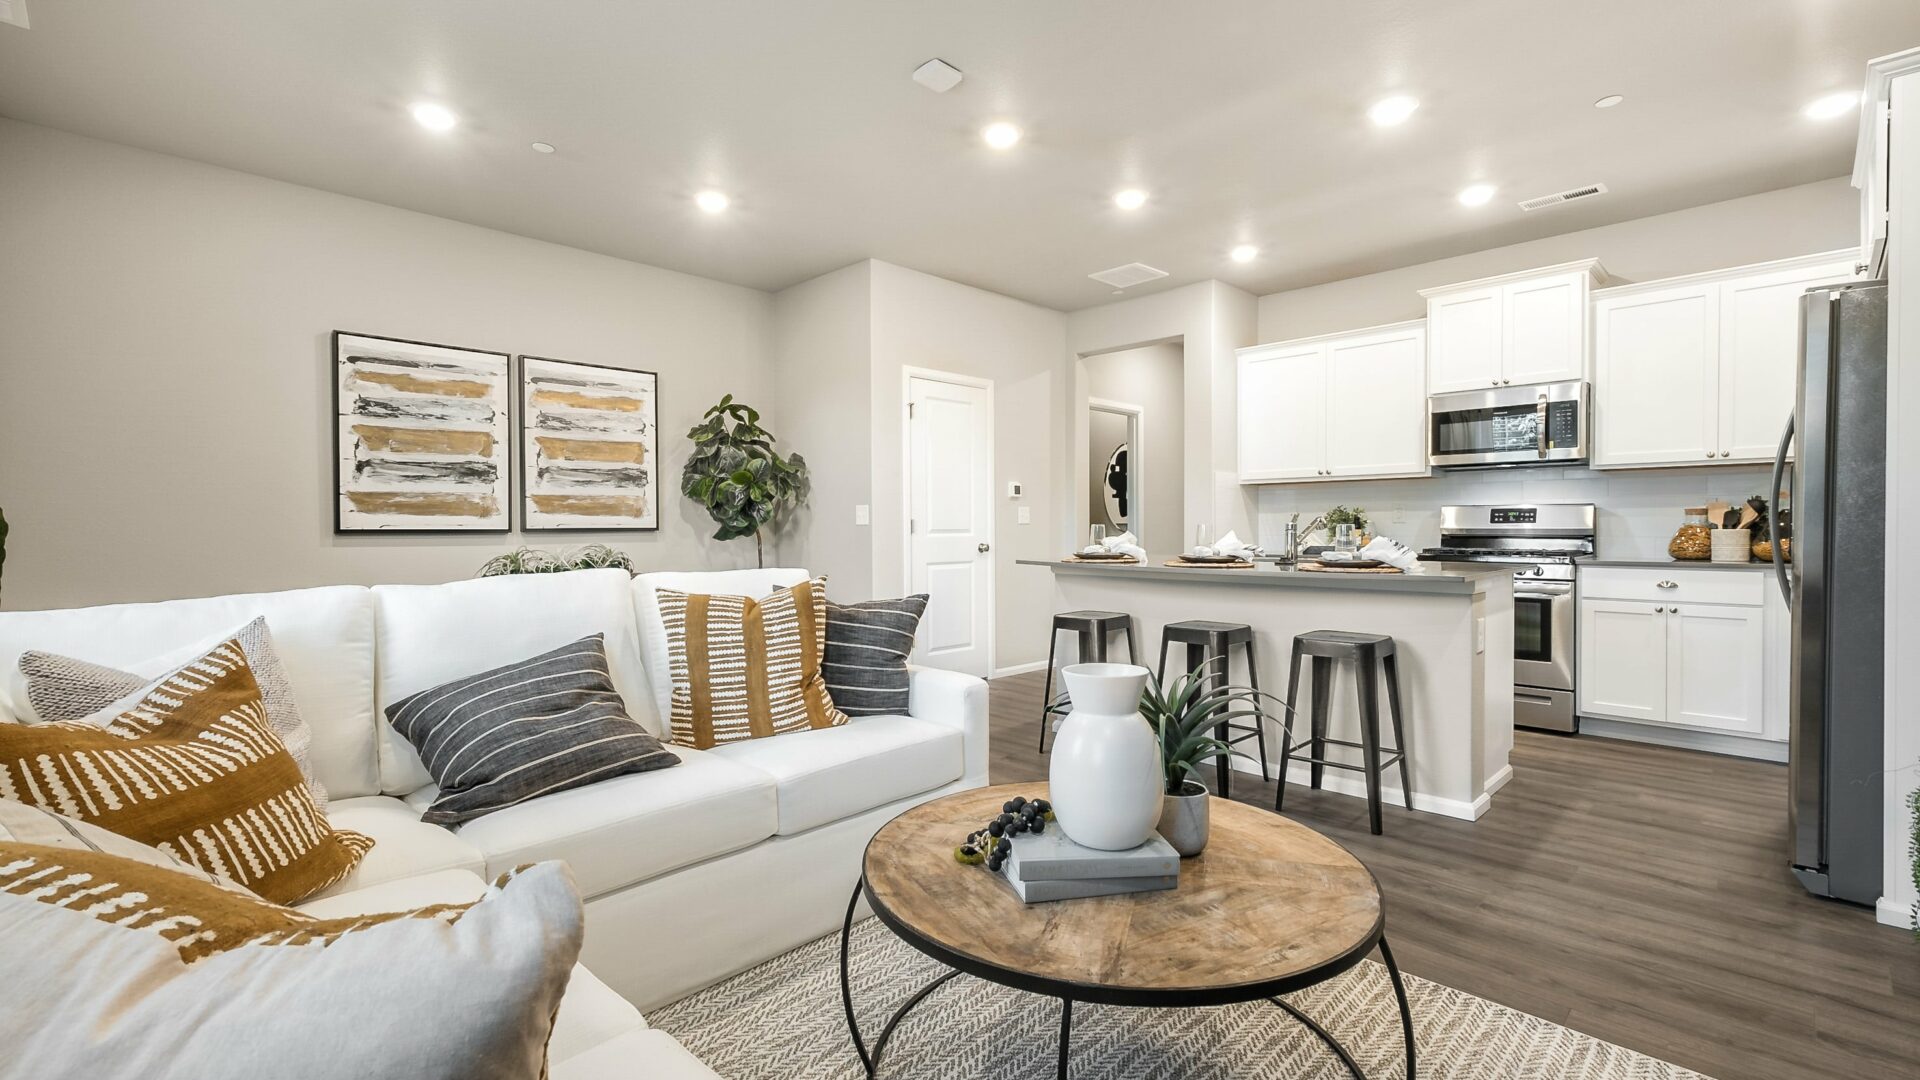 Lennar Stonehill living room and kitchen open concept